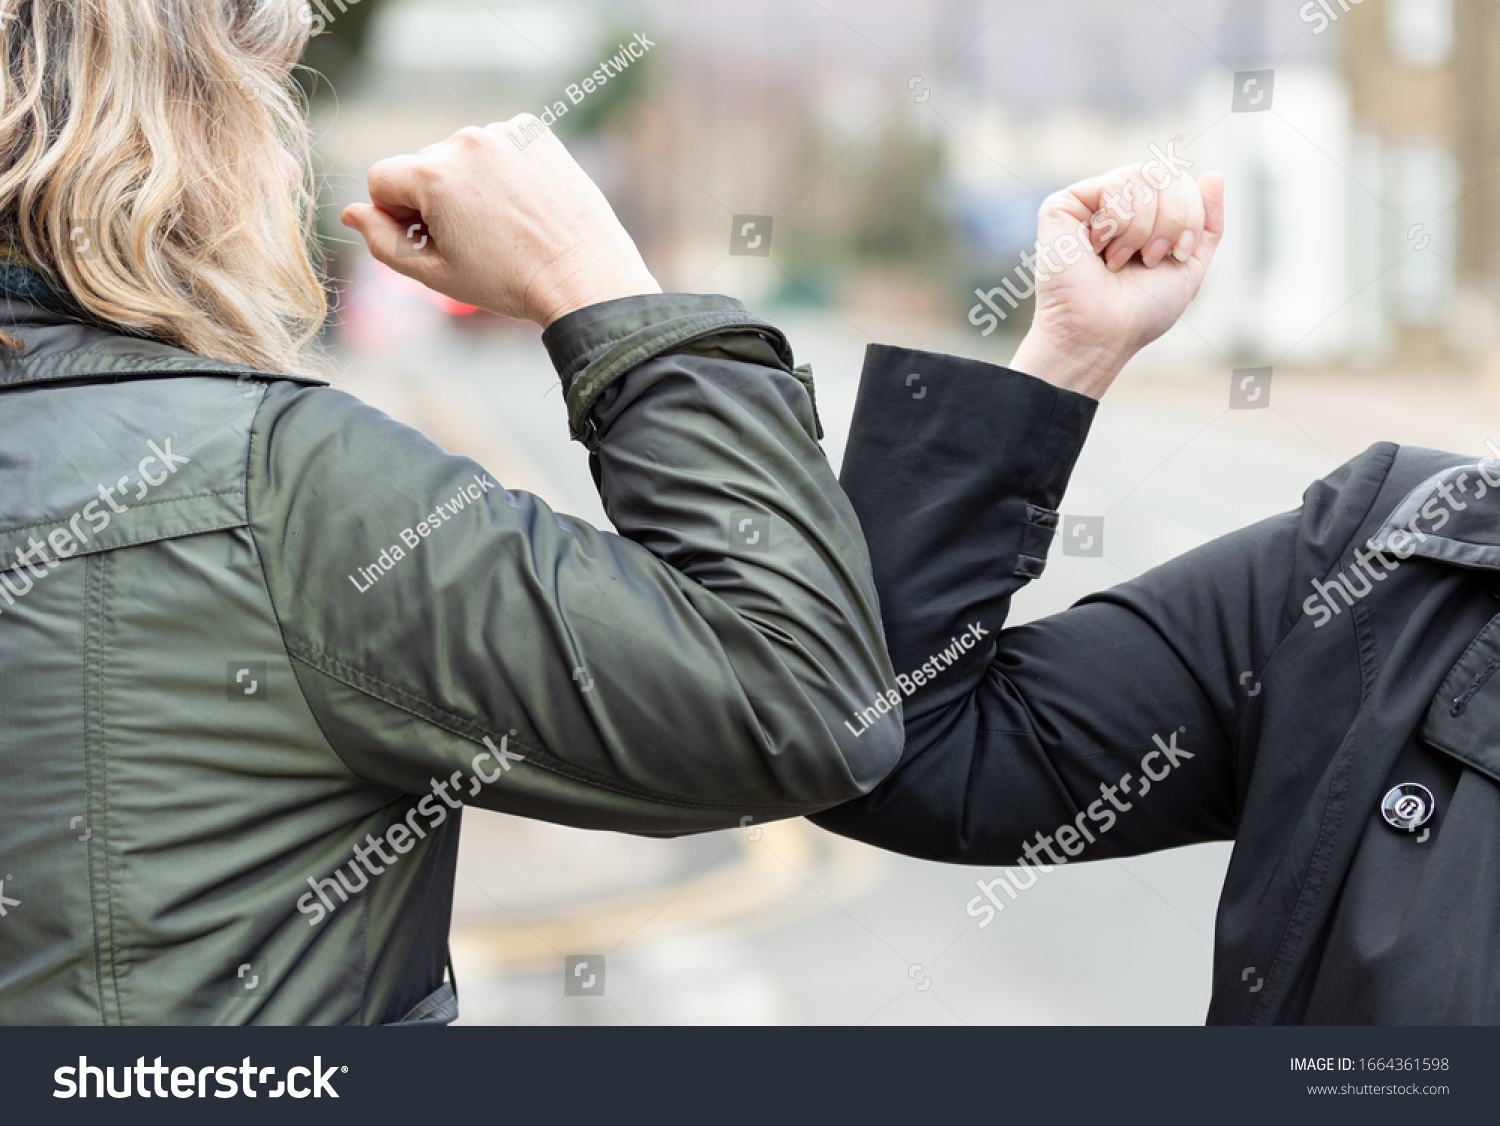 Elbow bump. New novel greeting to avoid the spread of coronavirus. Two women friends meet in a British street with bare hands. Instead of greeting with a hug or handshake, they bump elbows instead. #1664361598